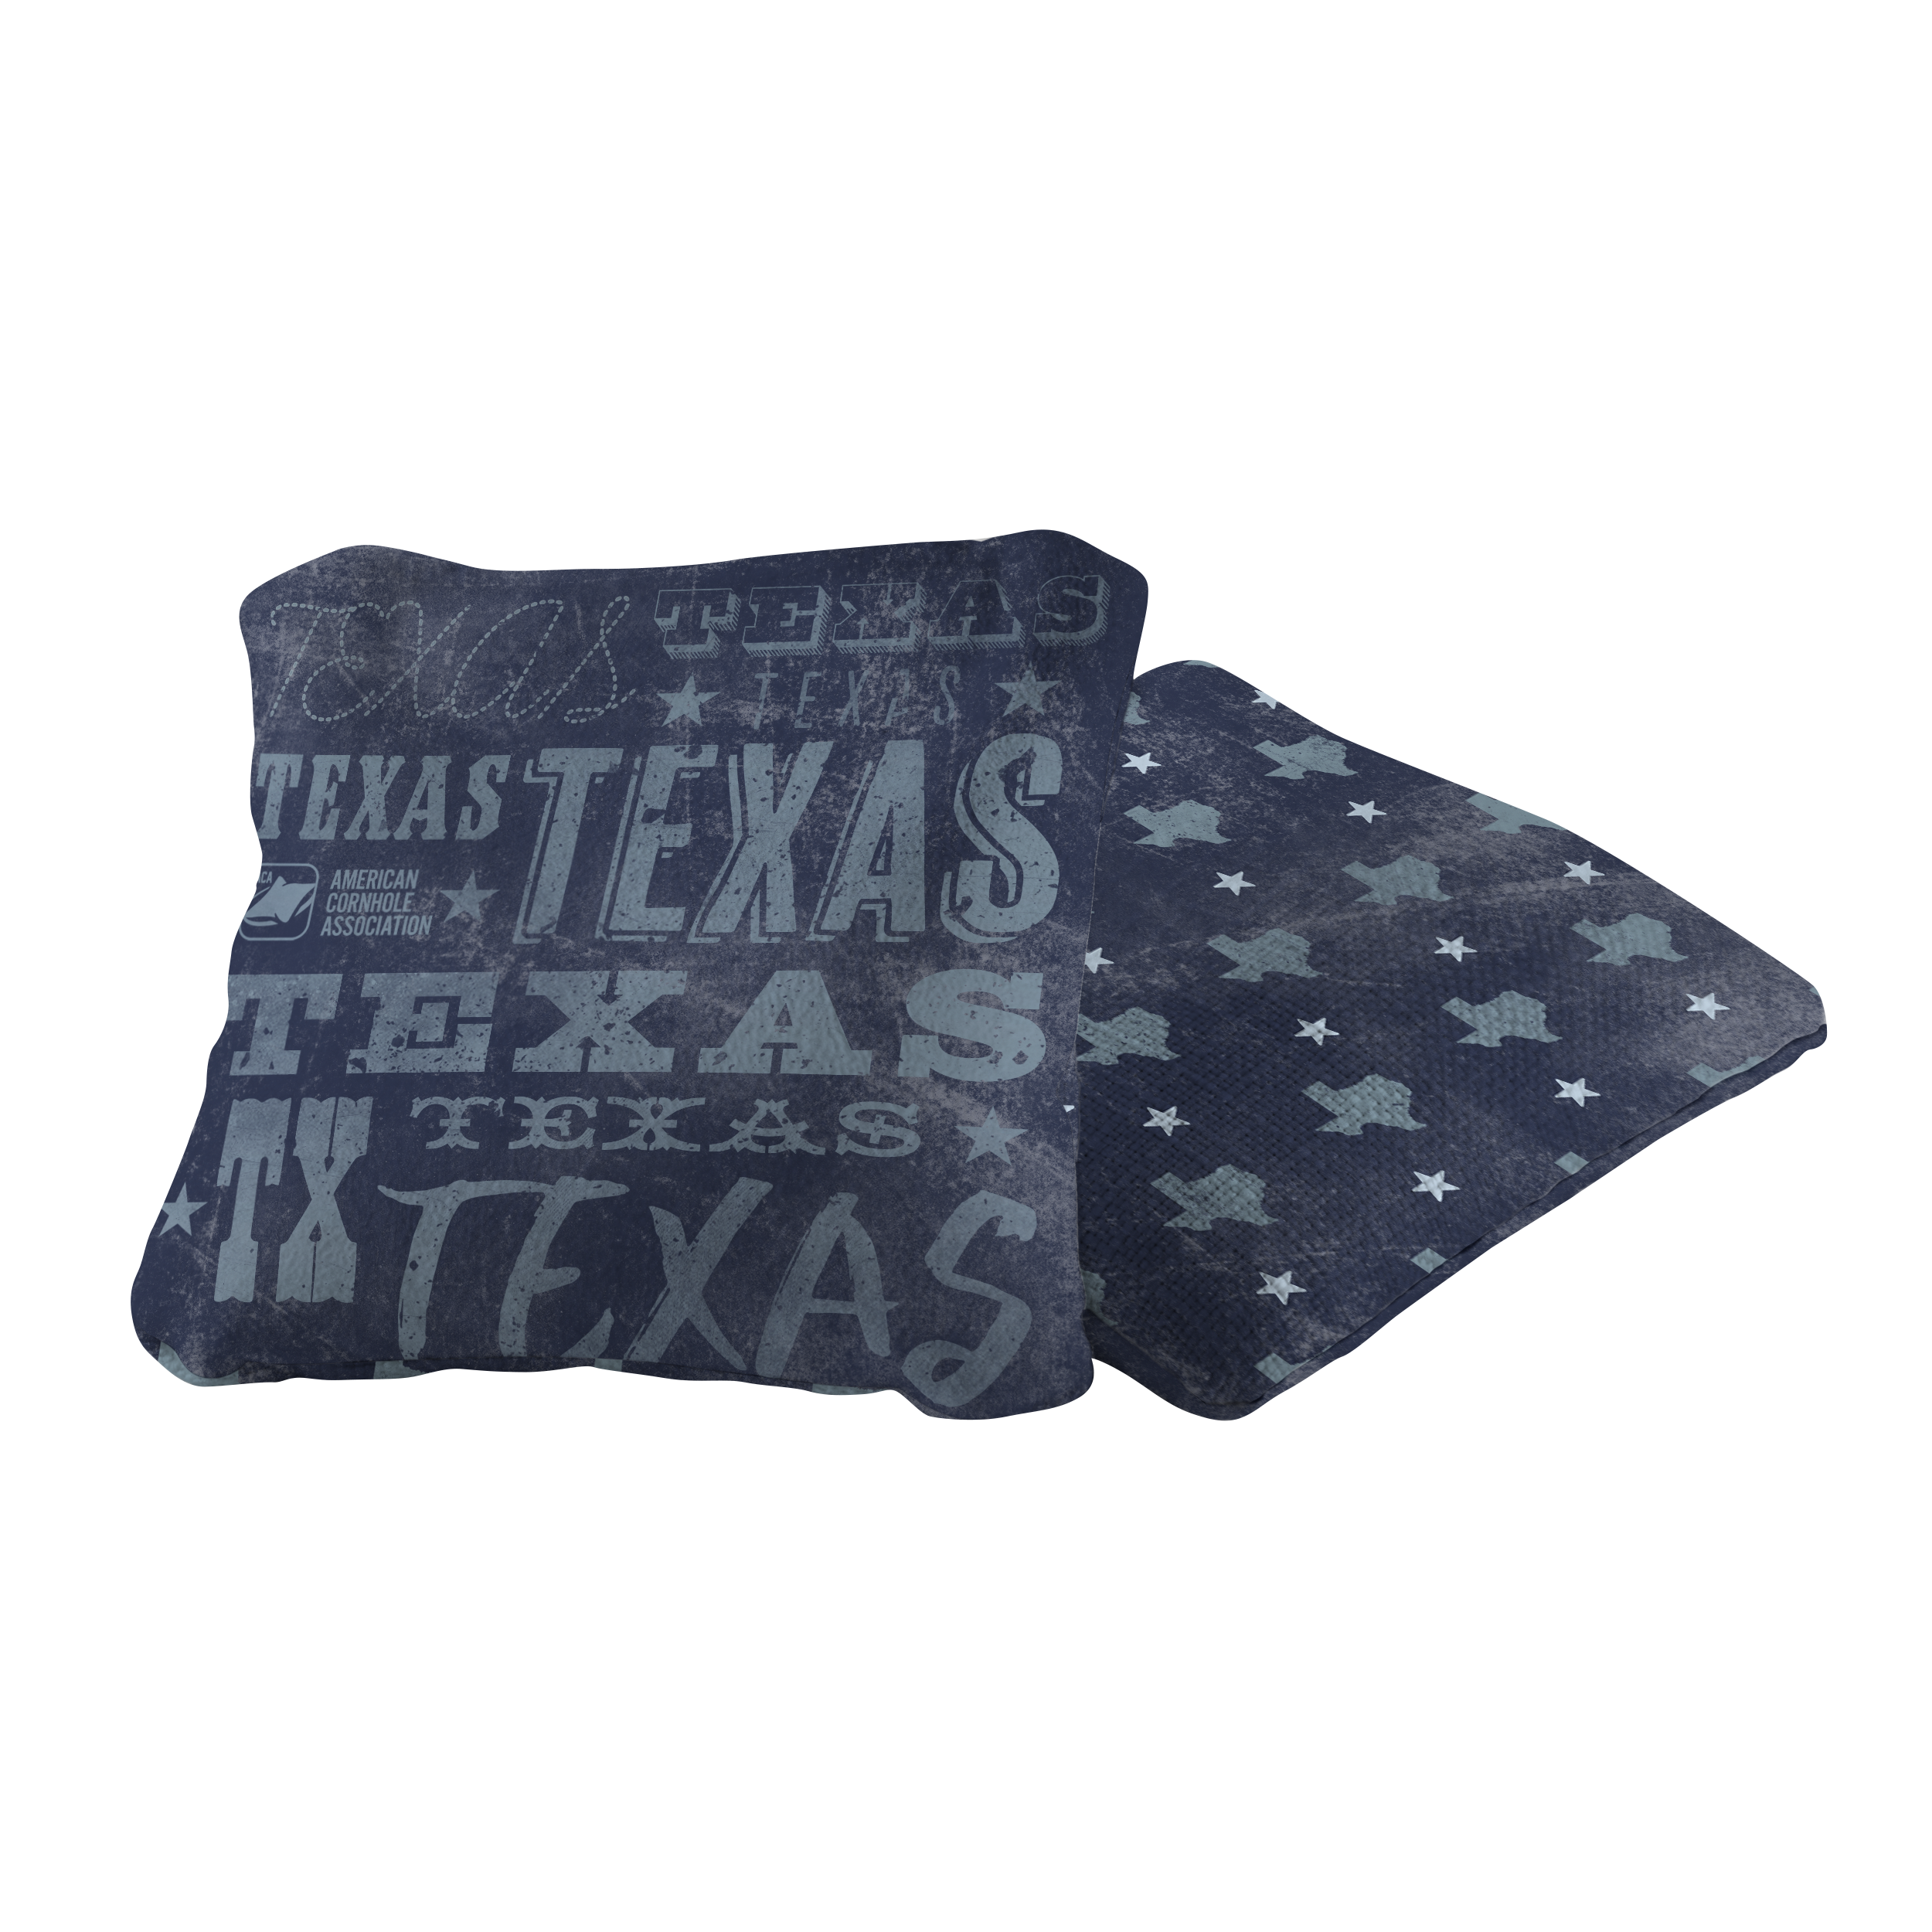 6-in Synergy Pro Texas Distressed Professional Regulation Cornhole Bags